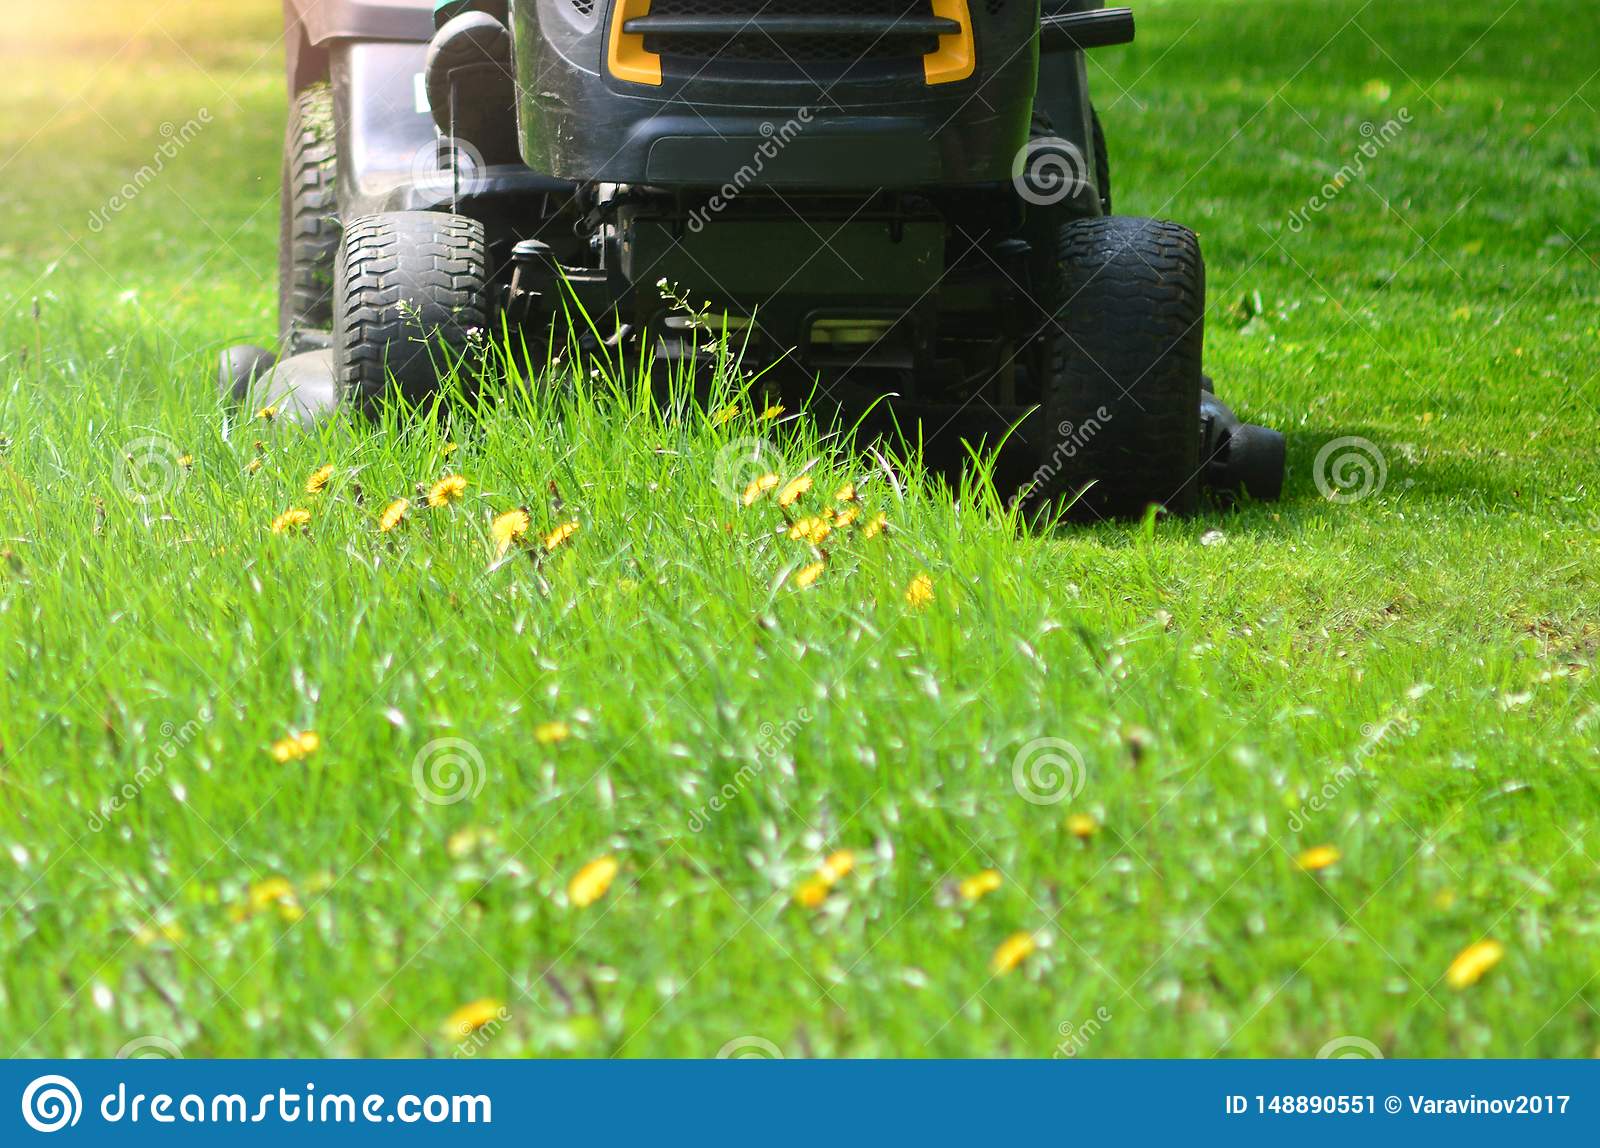 Professional Lawn Mower Grass Cutting Close Up Stock Image ...